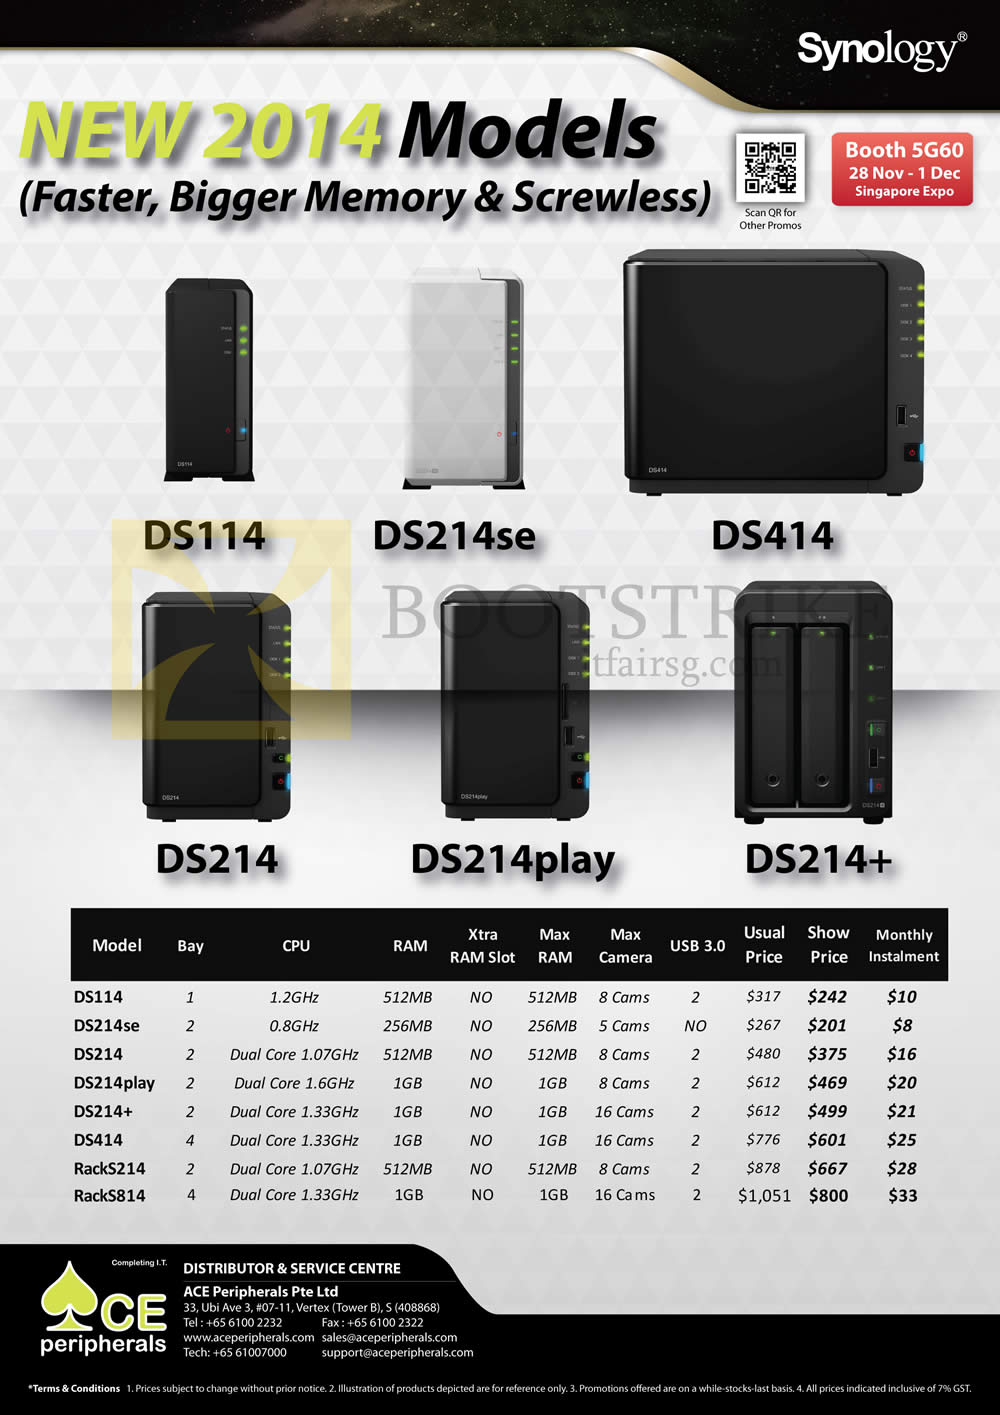 SITEX 2013 price list image brochure of Ace Peripherals Synology NAS DS114 DS214se DS414 DS214 DS214play DS214plus RackS214 RackS814